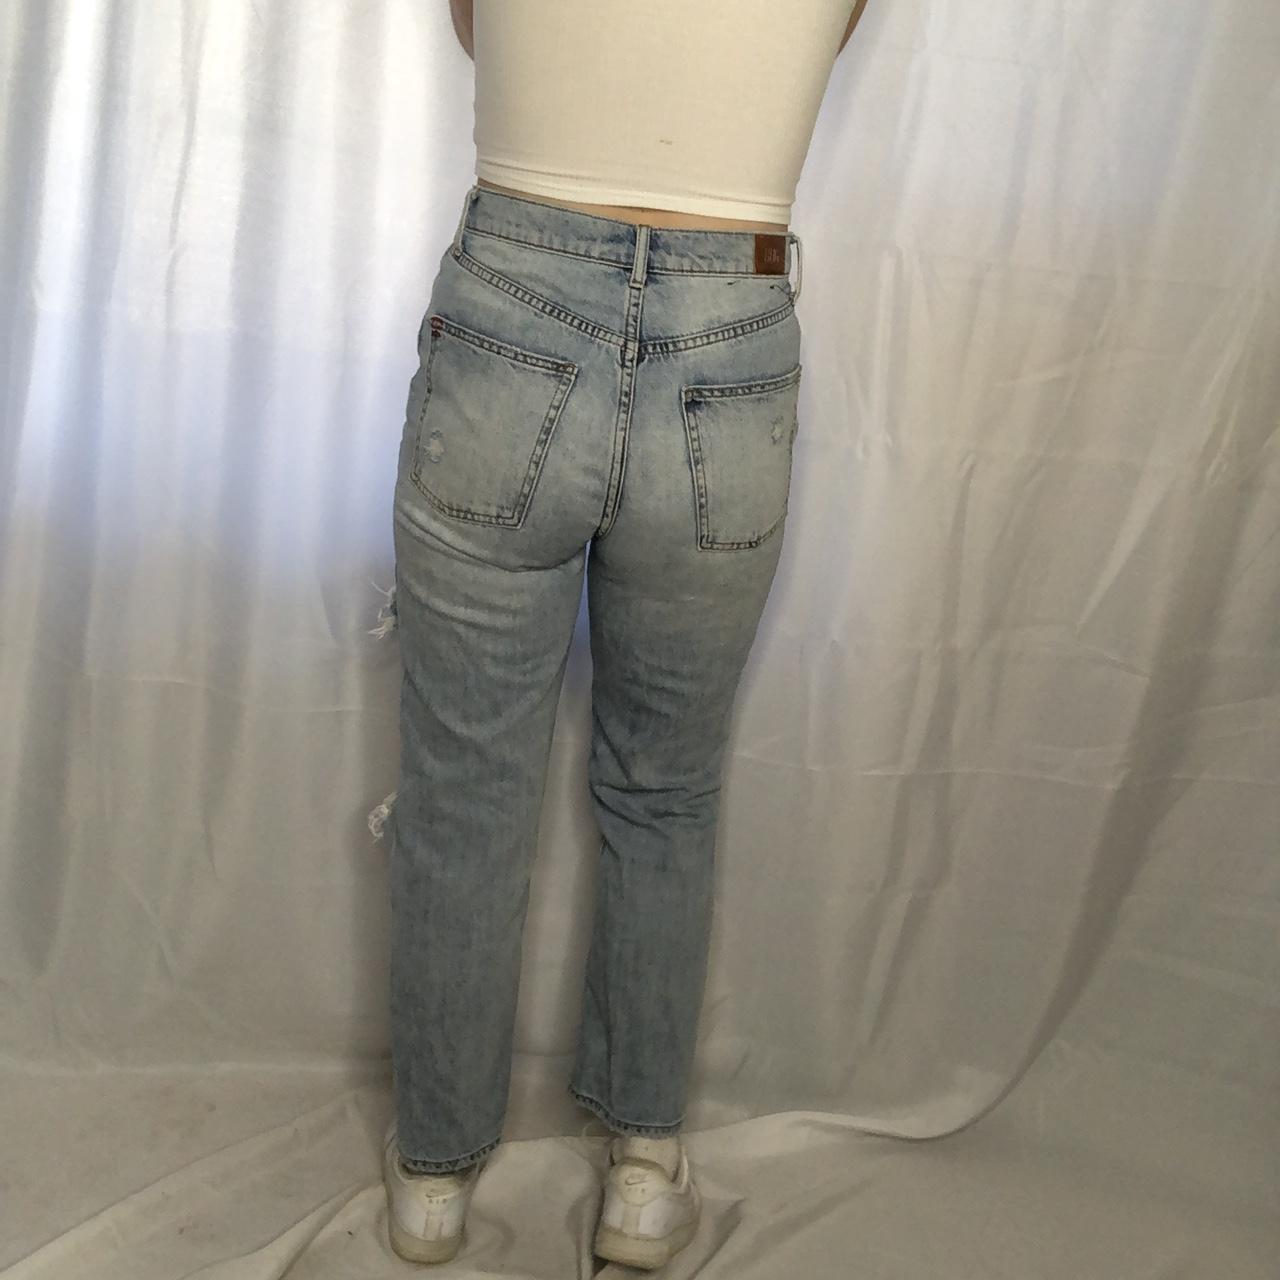 Product Image 4 - Distressed Urban Outfitters Jeans. Light